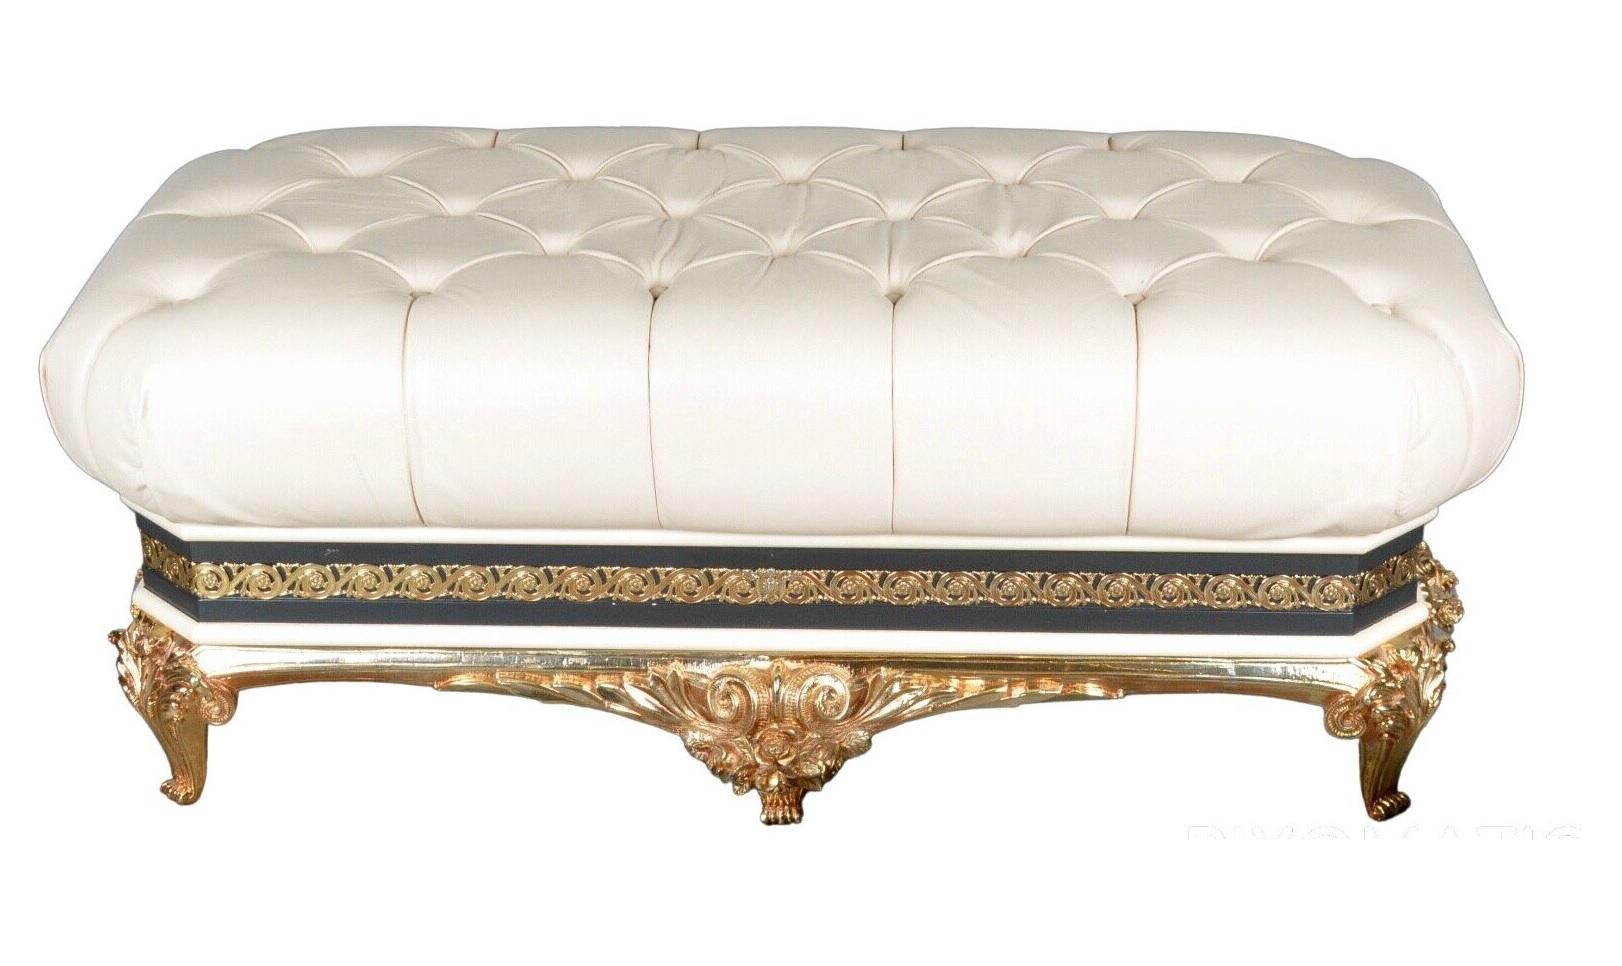 Spanish Exclusive Rococo Vidal Grau Footstool, C 1970 / Matching Furniture Available For Sale